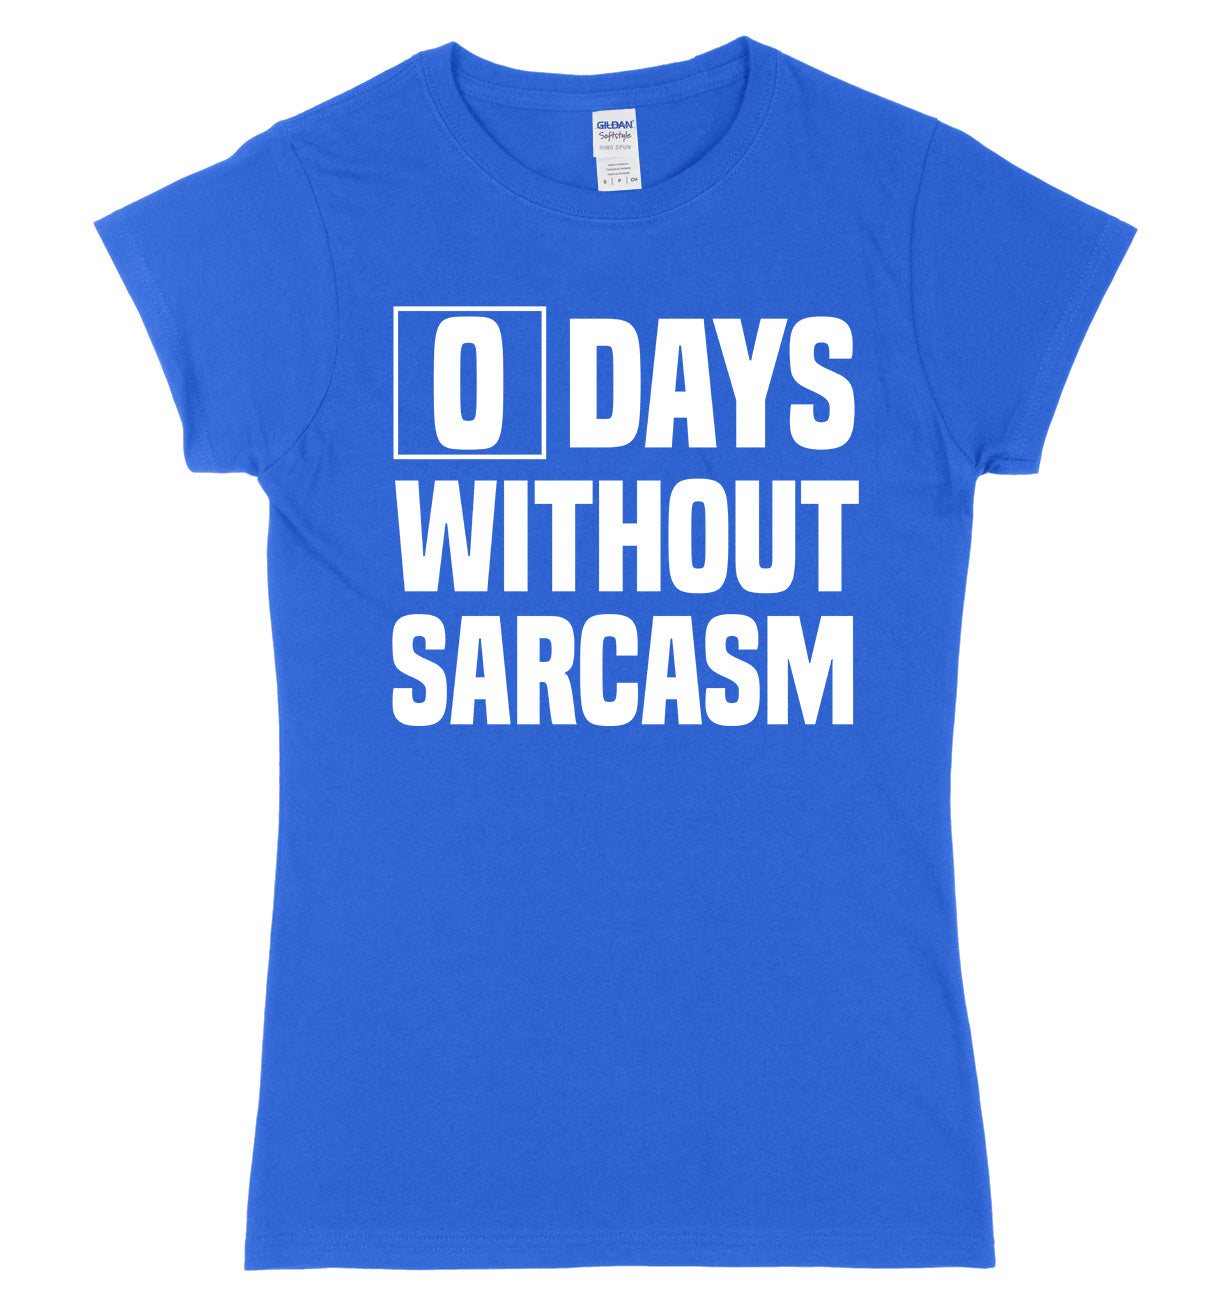 0 Days Without Sarcasm Womens Slim Fit Funny Slogan T-Shirt